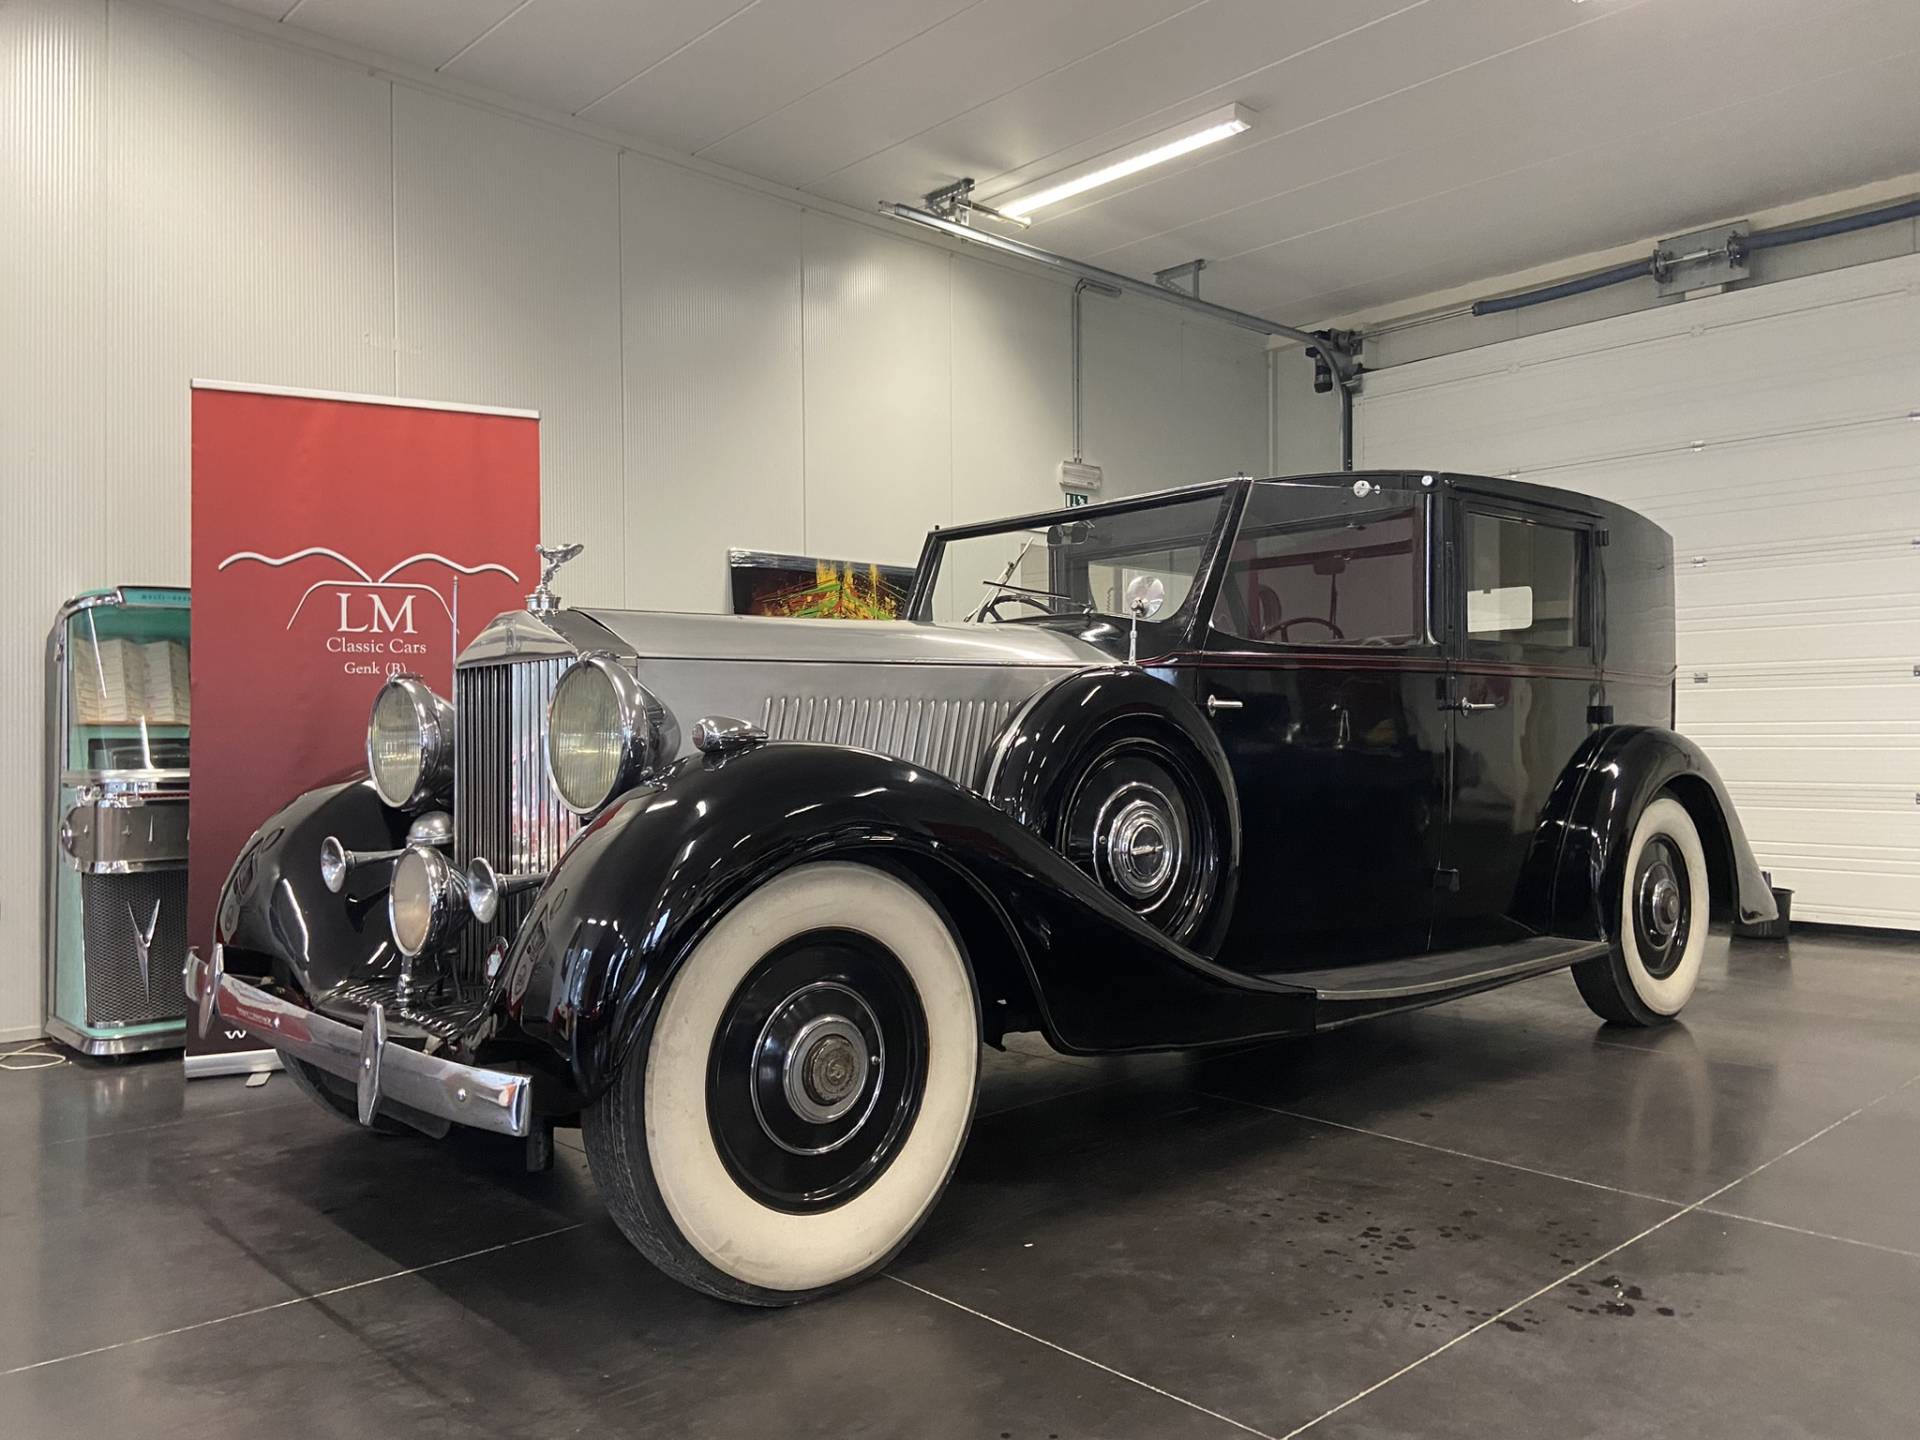 Legendary Rolls Royce 20 HP or Twenty turns 100 years old today   Overdrive